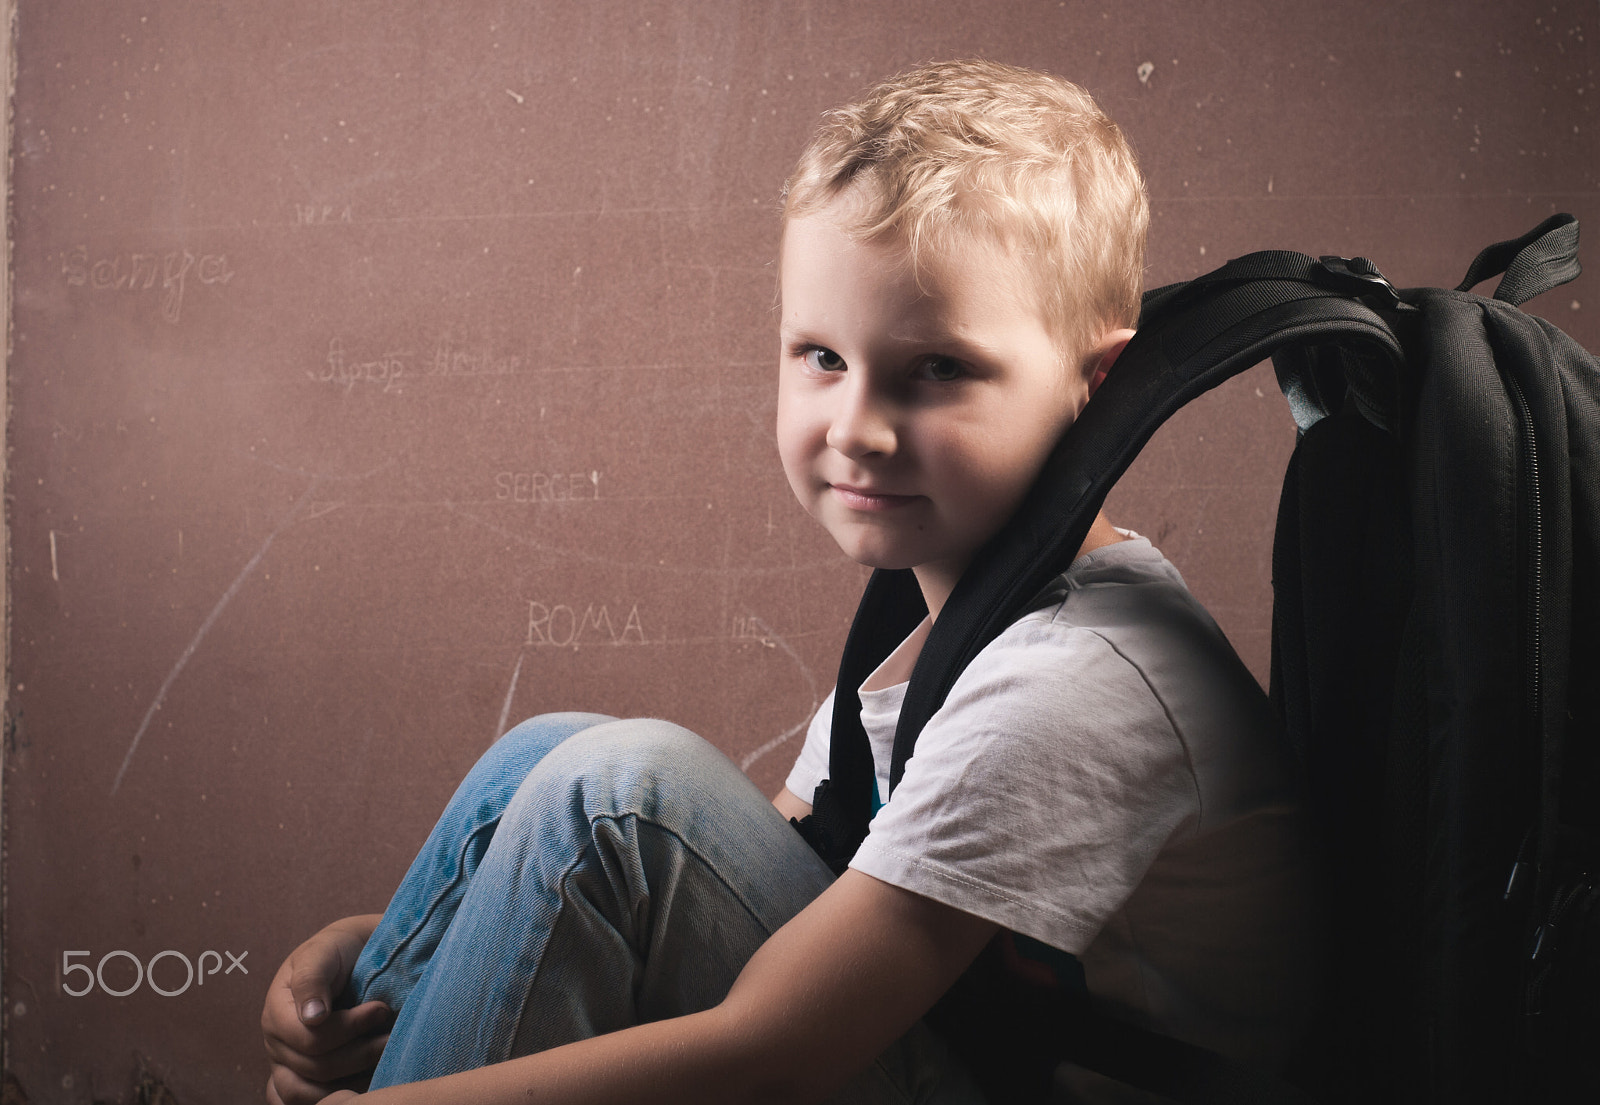 AF Nikkor 50mm f/1.8 N sample photo. Little boy with a big black backpack, a guy with blond hair posing at a chalkboard, photography